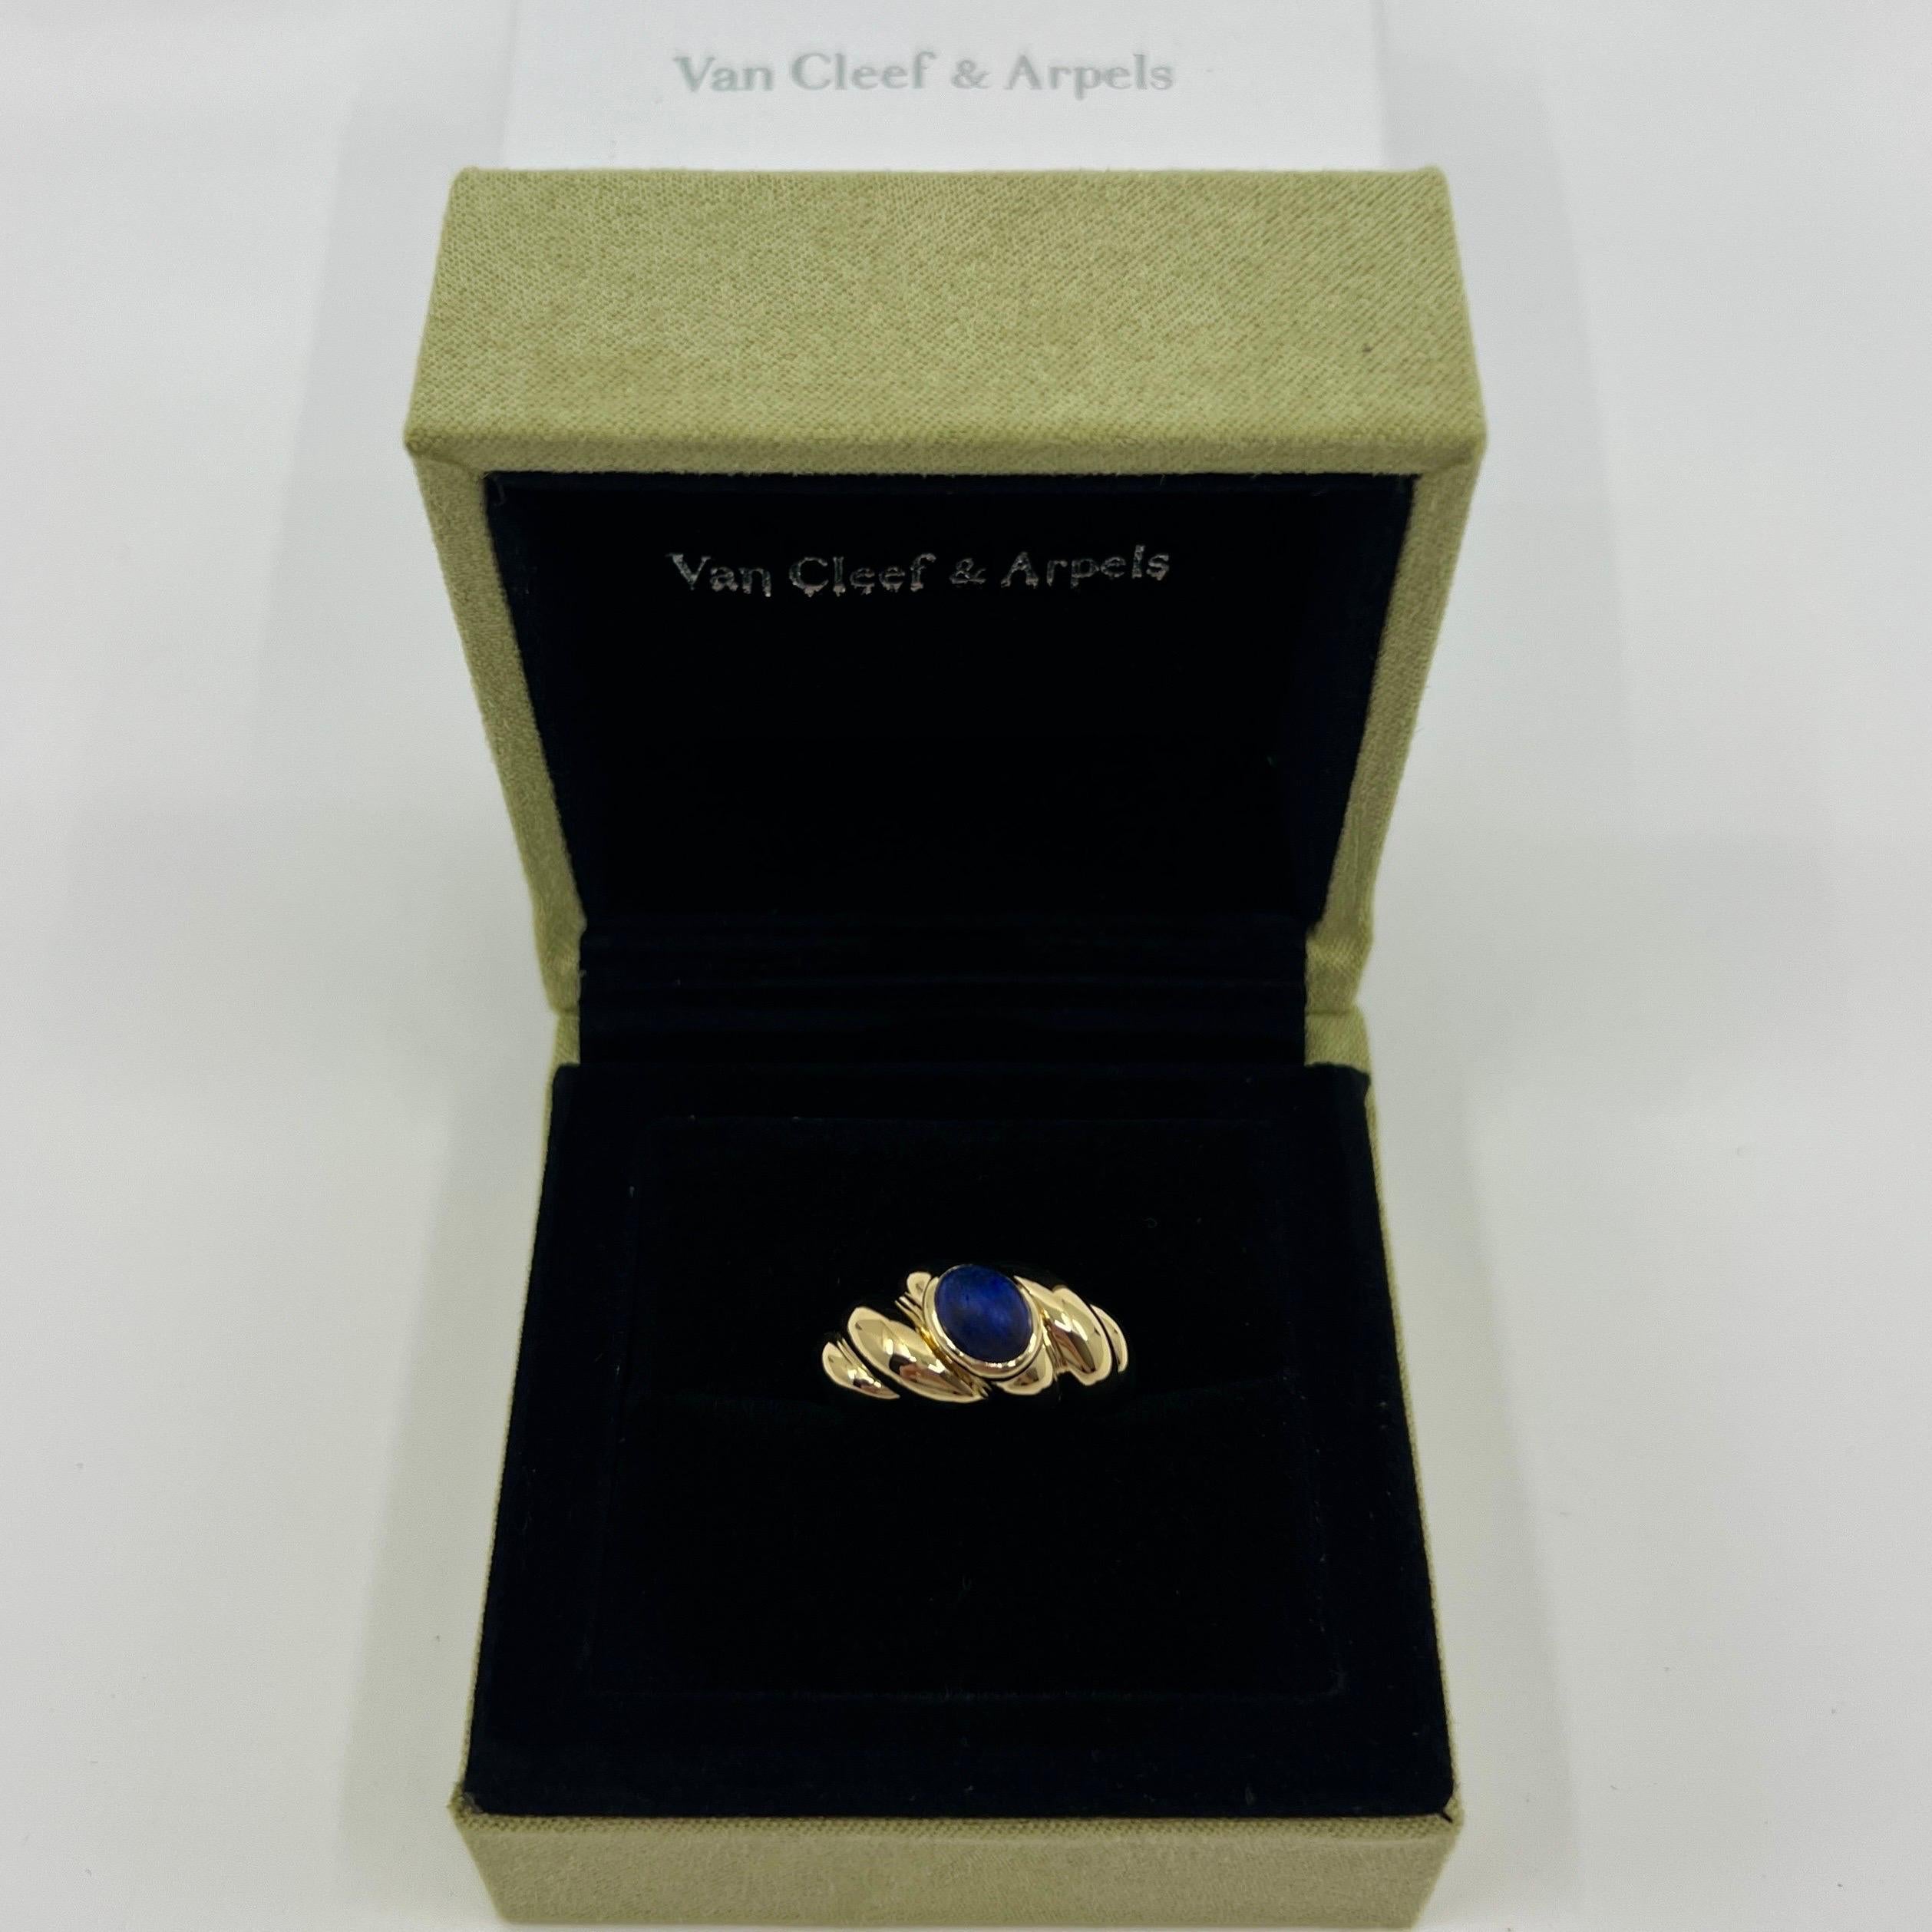 Rare Vintage Van Cleef & Arpels Lapis Lazuli 18k Yellow Gold Swirl Ring.

A stunning ring with a unique design typical of Van Cleef & Arpels, set with a beautiful oval cabochon lapis lazuli.
The piece of lapis is deep blue and measures 8x6mm.
Fine